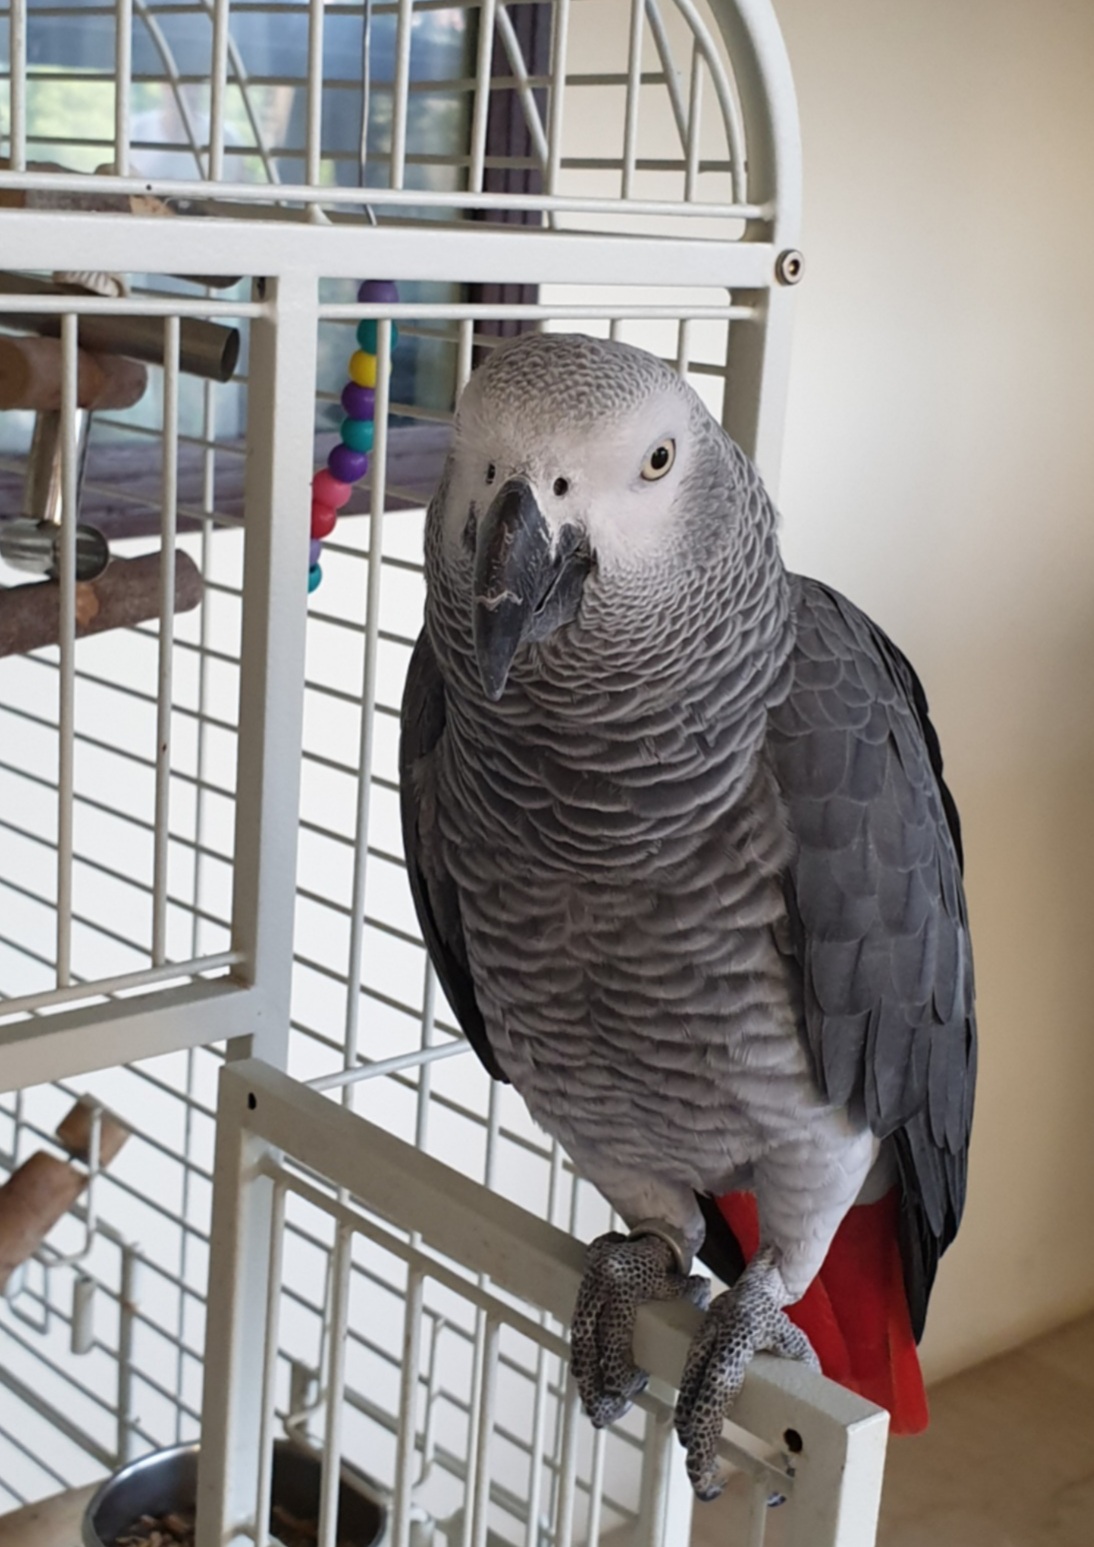 Pet related post in Lebanon: Lost grey parrot with a red tale in..